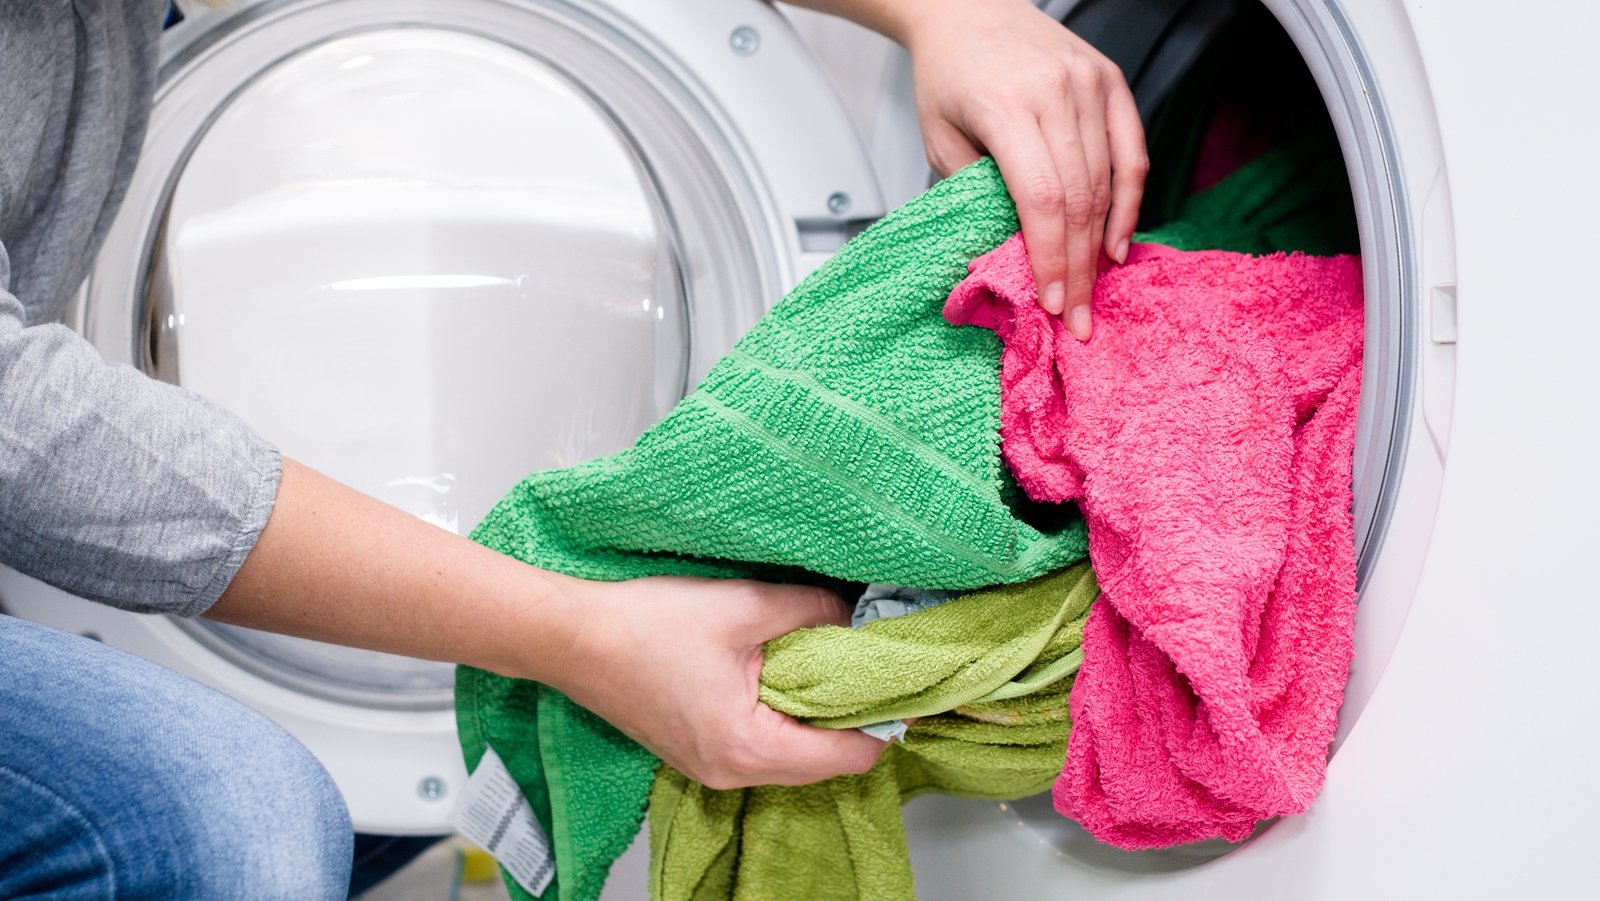 here-s-why-you-should-wash-new-clothes-before-wearing-them